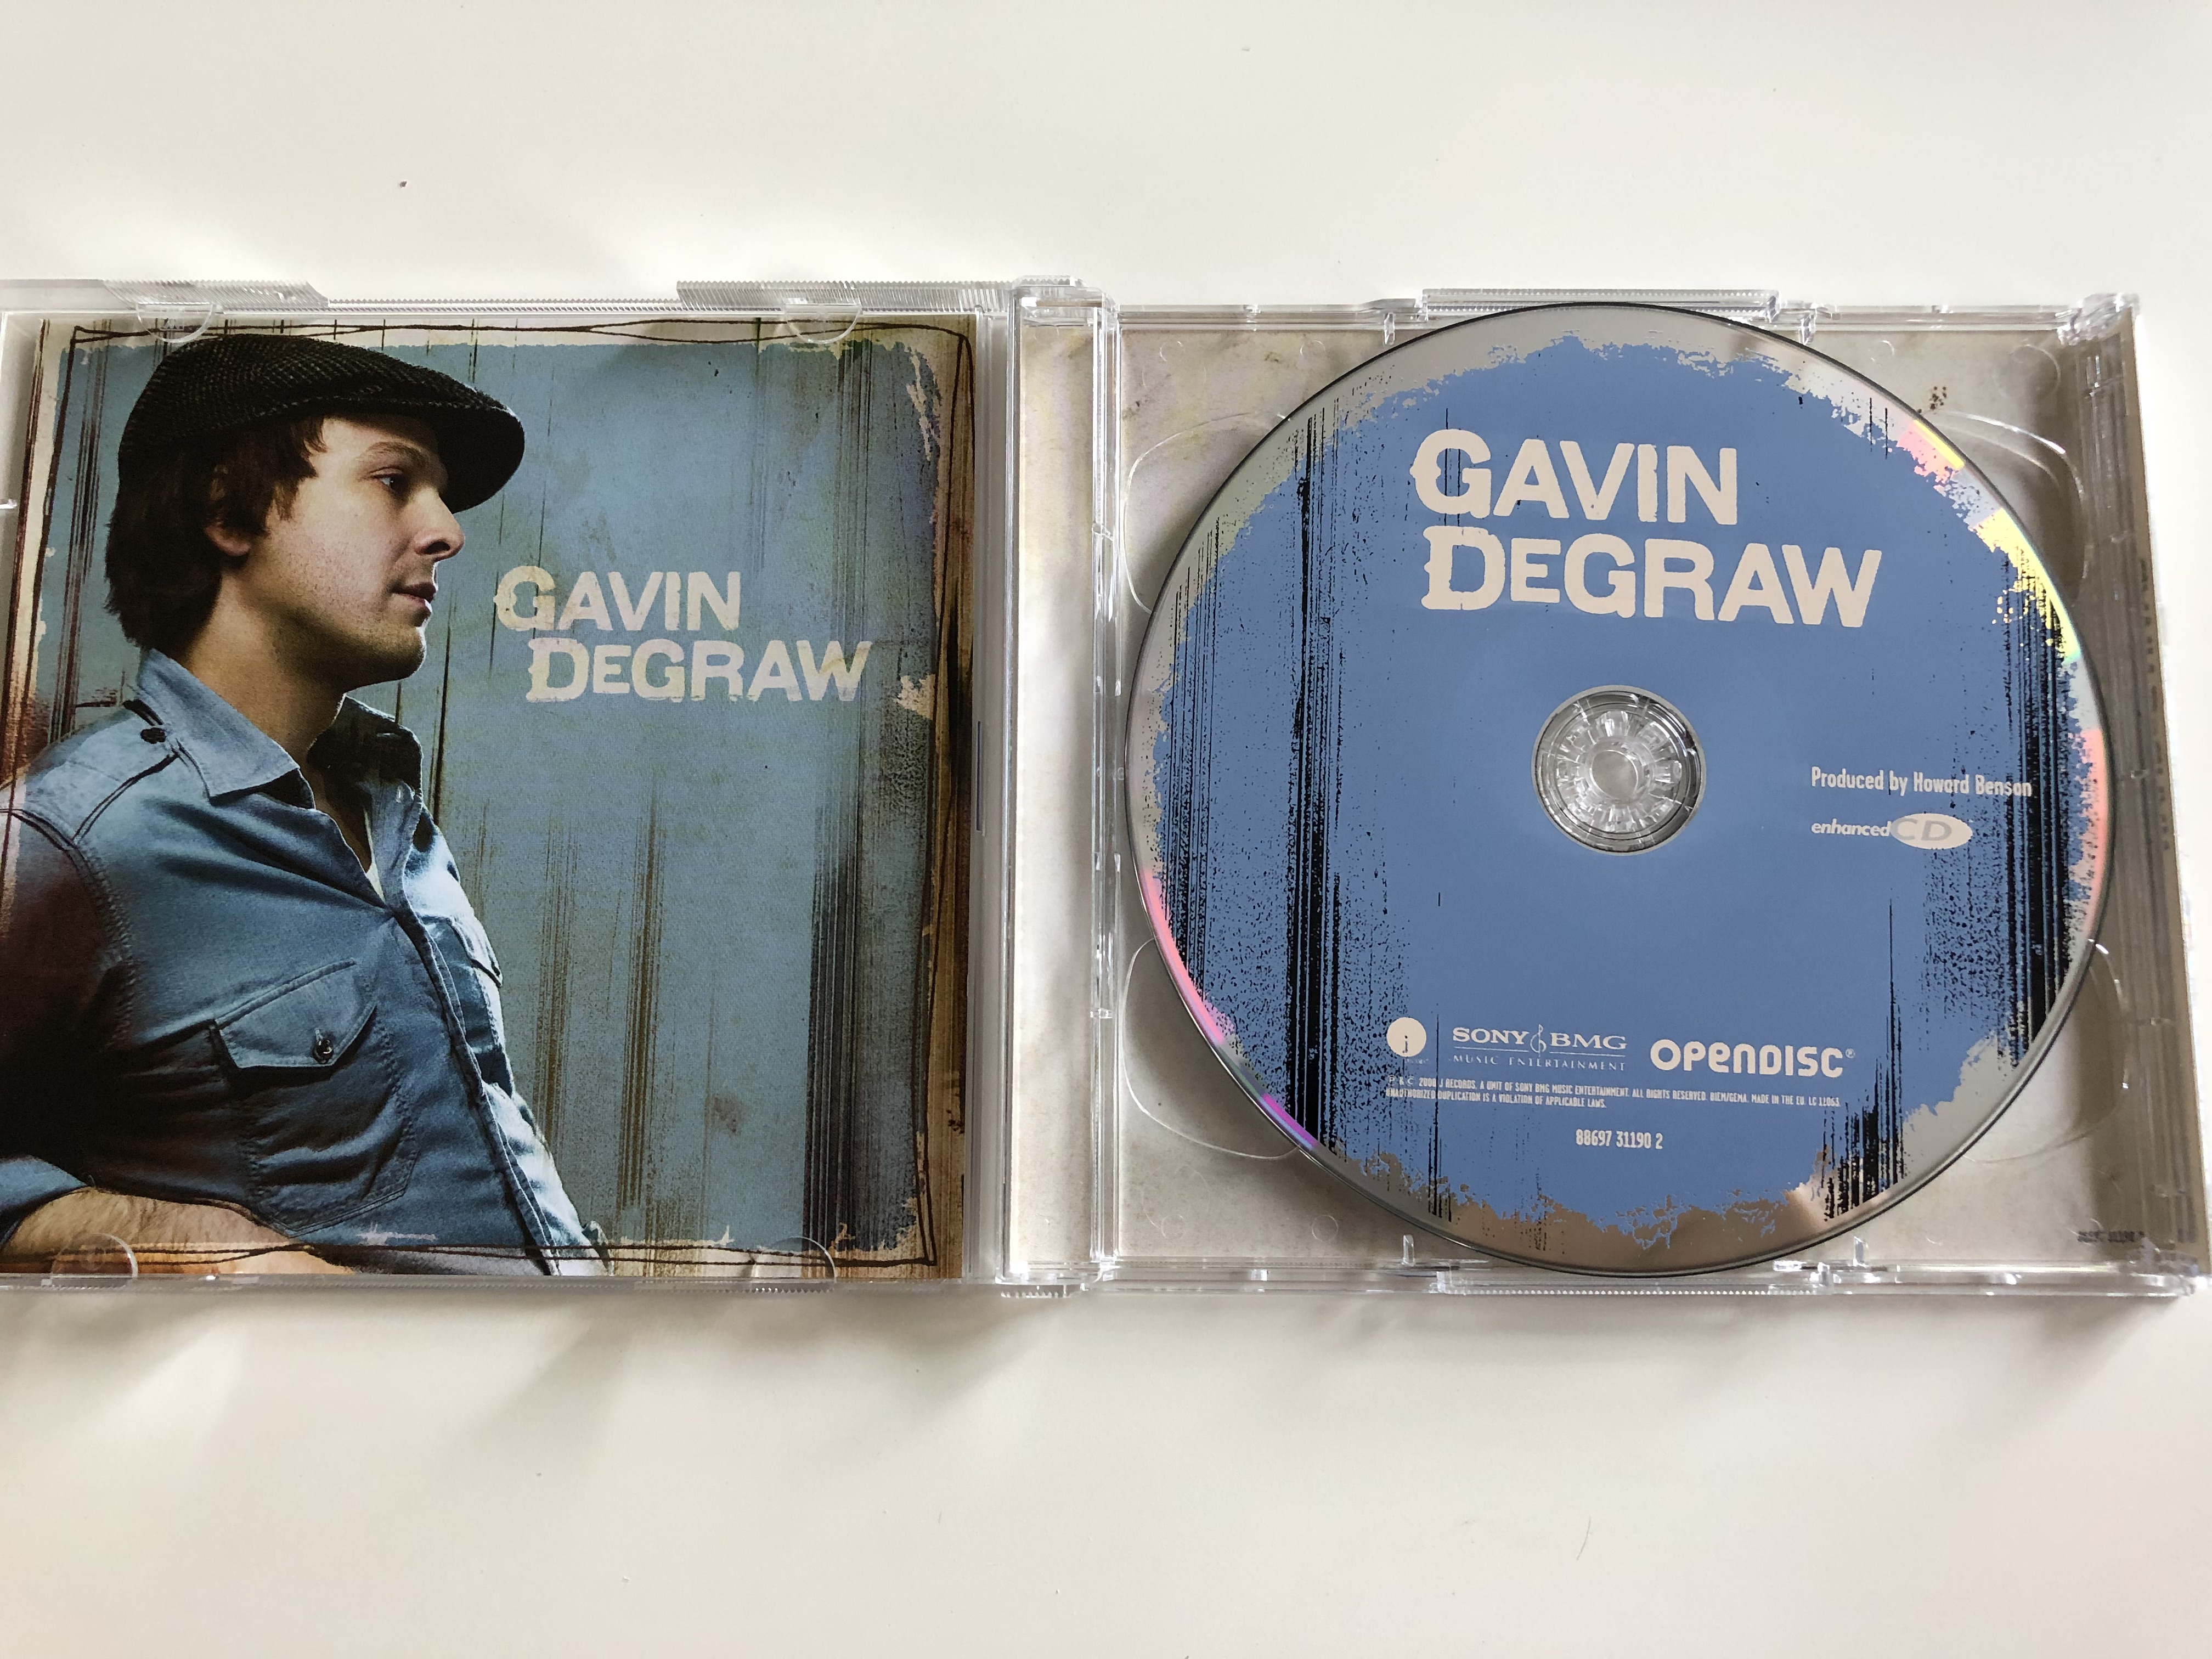 gavin-degraw-opendisc-in-love-with-a-girl-next-to-me-she-holds-a-key-let-it-go-create-your-own-link-with-gavin-degraw-dvd-2008-2-.jpg